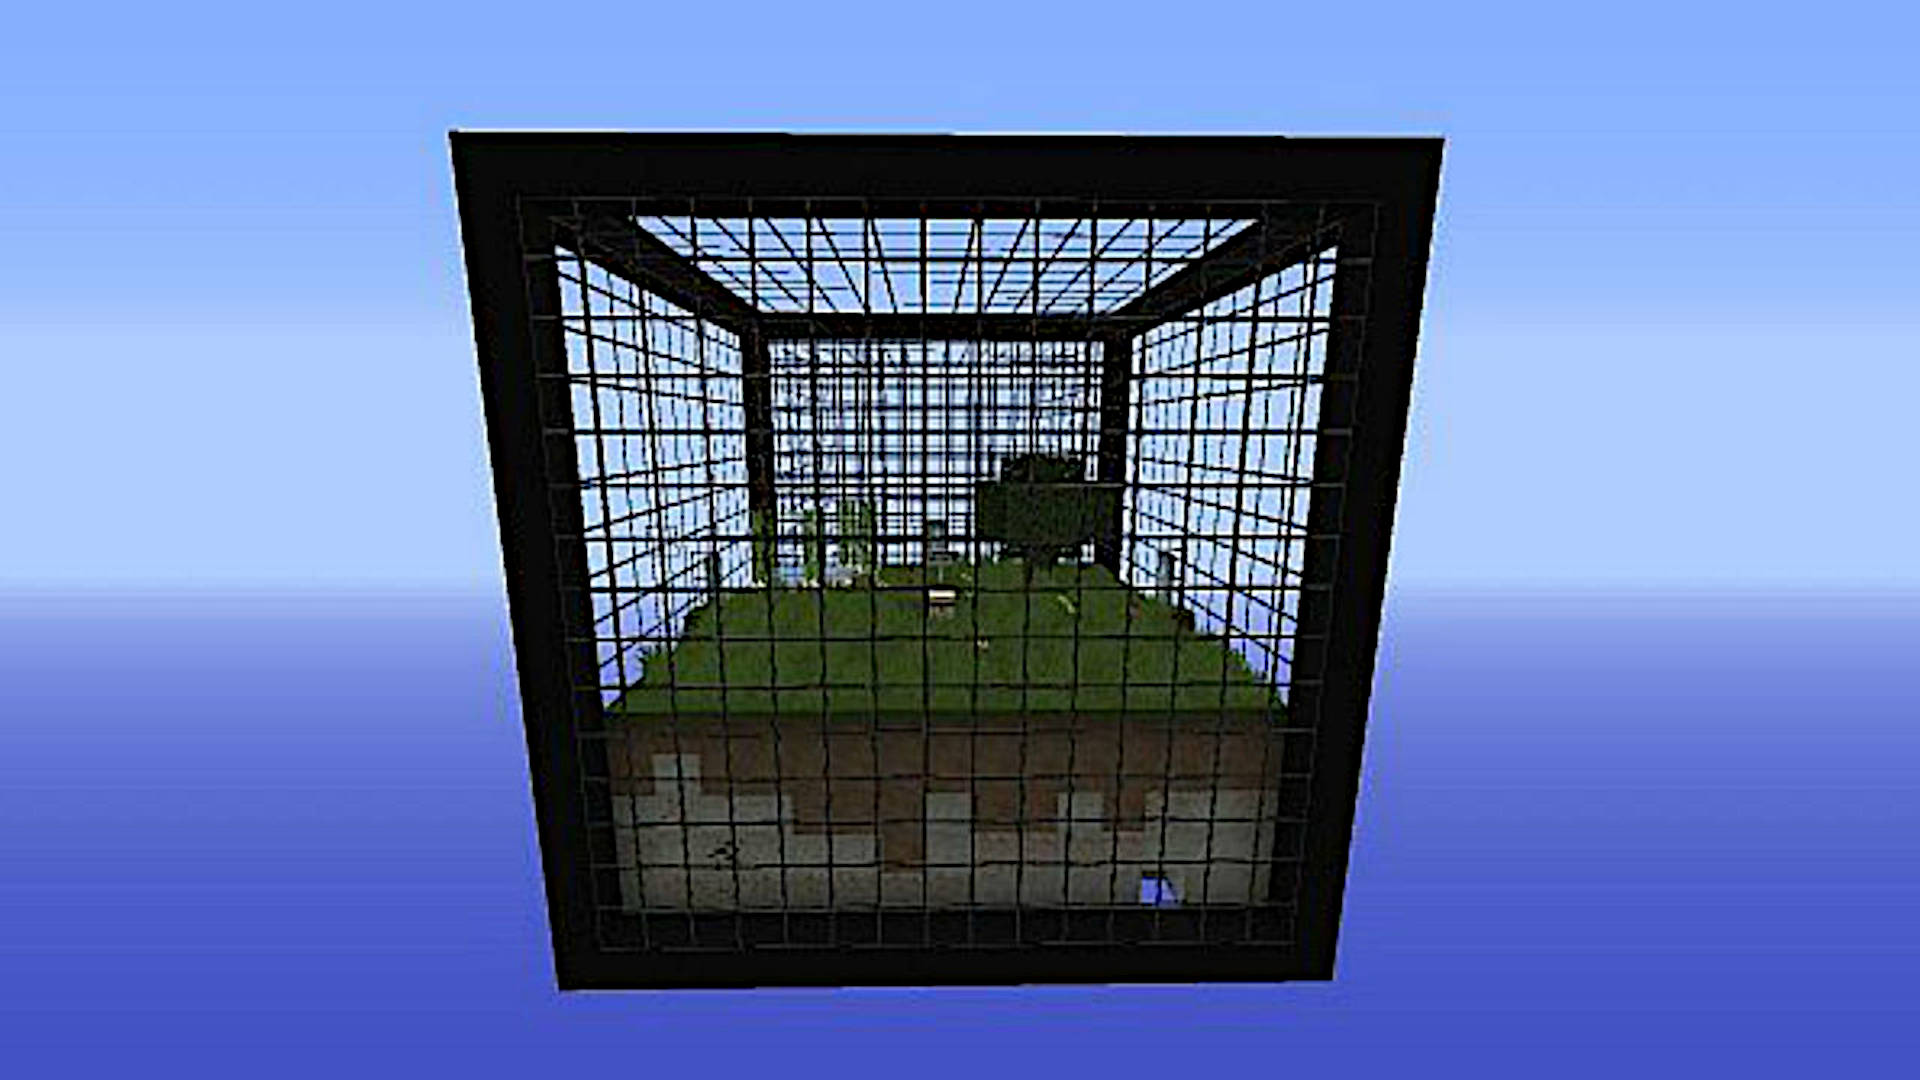 Minecraft Adventure Map 'The Challenges' 2 PLAYERS NEEDED Minecraft Map